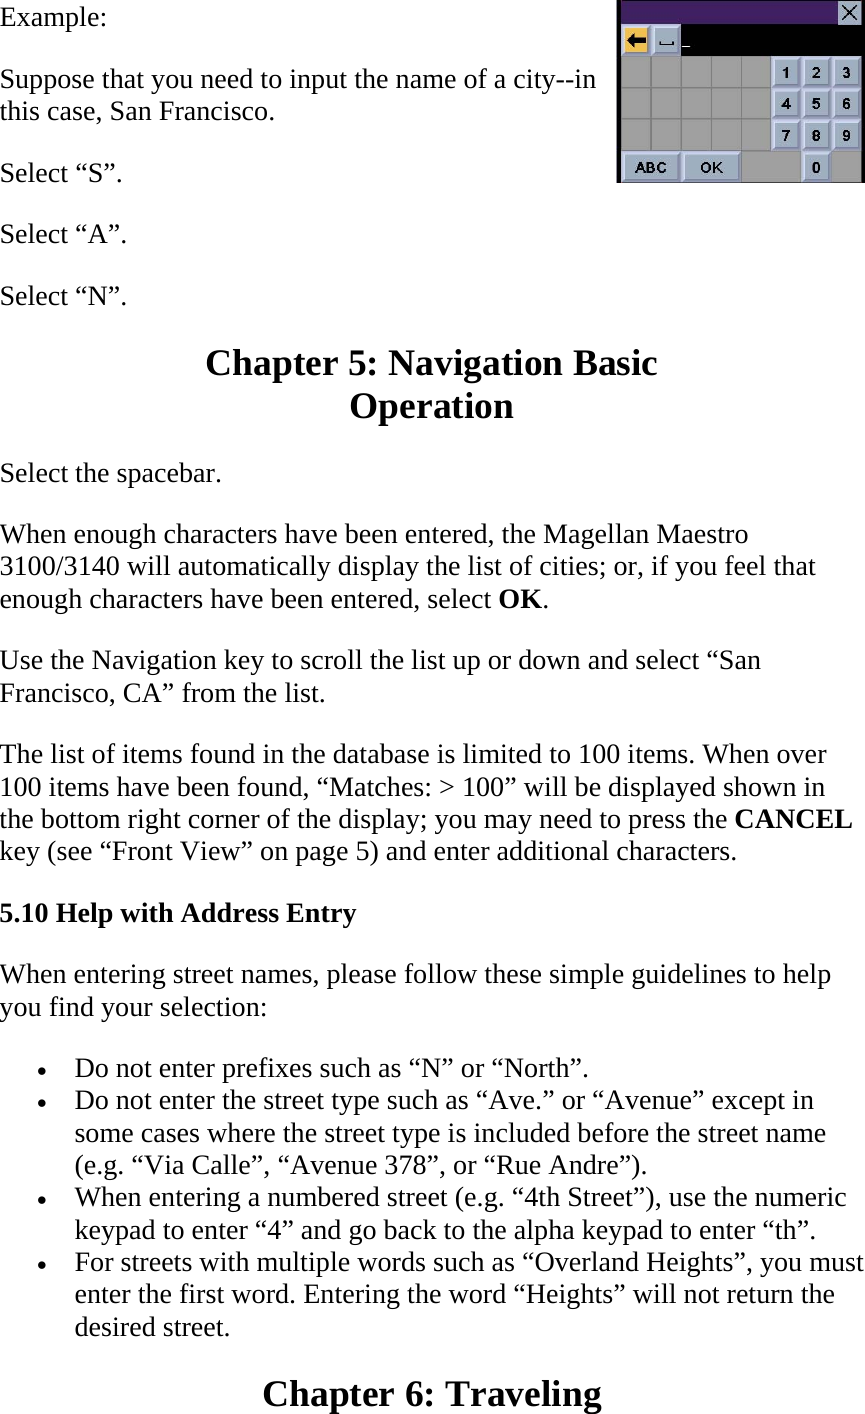 Example:  Suppose that you need to input the name of a city--in this case, San Francisco.  Select “S”.  Select “A”.  Select “N”.  Chapter 5: Navigation Basic  Operation  Select the spacebar.  When enough characters have been entered, the Magellan Maestro 3100/3140 will automatically display the list of cities; or, if you feel that enough characters have been entered, select OK.  Use the Navigation key to scroll the list up or down and select “San Francisco, CA” from the list.  The list of items found in the database is limited to 100 items. When over 100 items have been found, “Matches: &gt; 100” will be displayed shown in the bottom right corner of the display; you may need to press the CANCEL key (see “Front View” on page 5) and enter additional characters.  5.10 Help with Address Entry  When entering street names, please follow these simple guidelines to help you find your selection:  • Do not enter prefixes such as “N” or “North”.  • Do not enter the street type such as “Ave.” or “Avenue” except in some cases where the street type is included before the street name (e.g. “Via Calle”, “Avenue 378”, or “Rue Andre”).  • When entering a numbered street (e.g. “4th Street”), use the numeric keypad to enter “4” and go back to the alpha keypad to enter “th”.  • For streets with multiple words such as “Overland Heights”, you must enter the first word. Entering the word “Heights” will not return the desired street.  Chapter 6: Traveling  